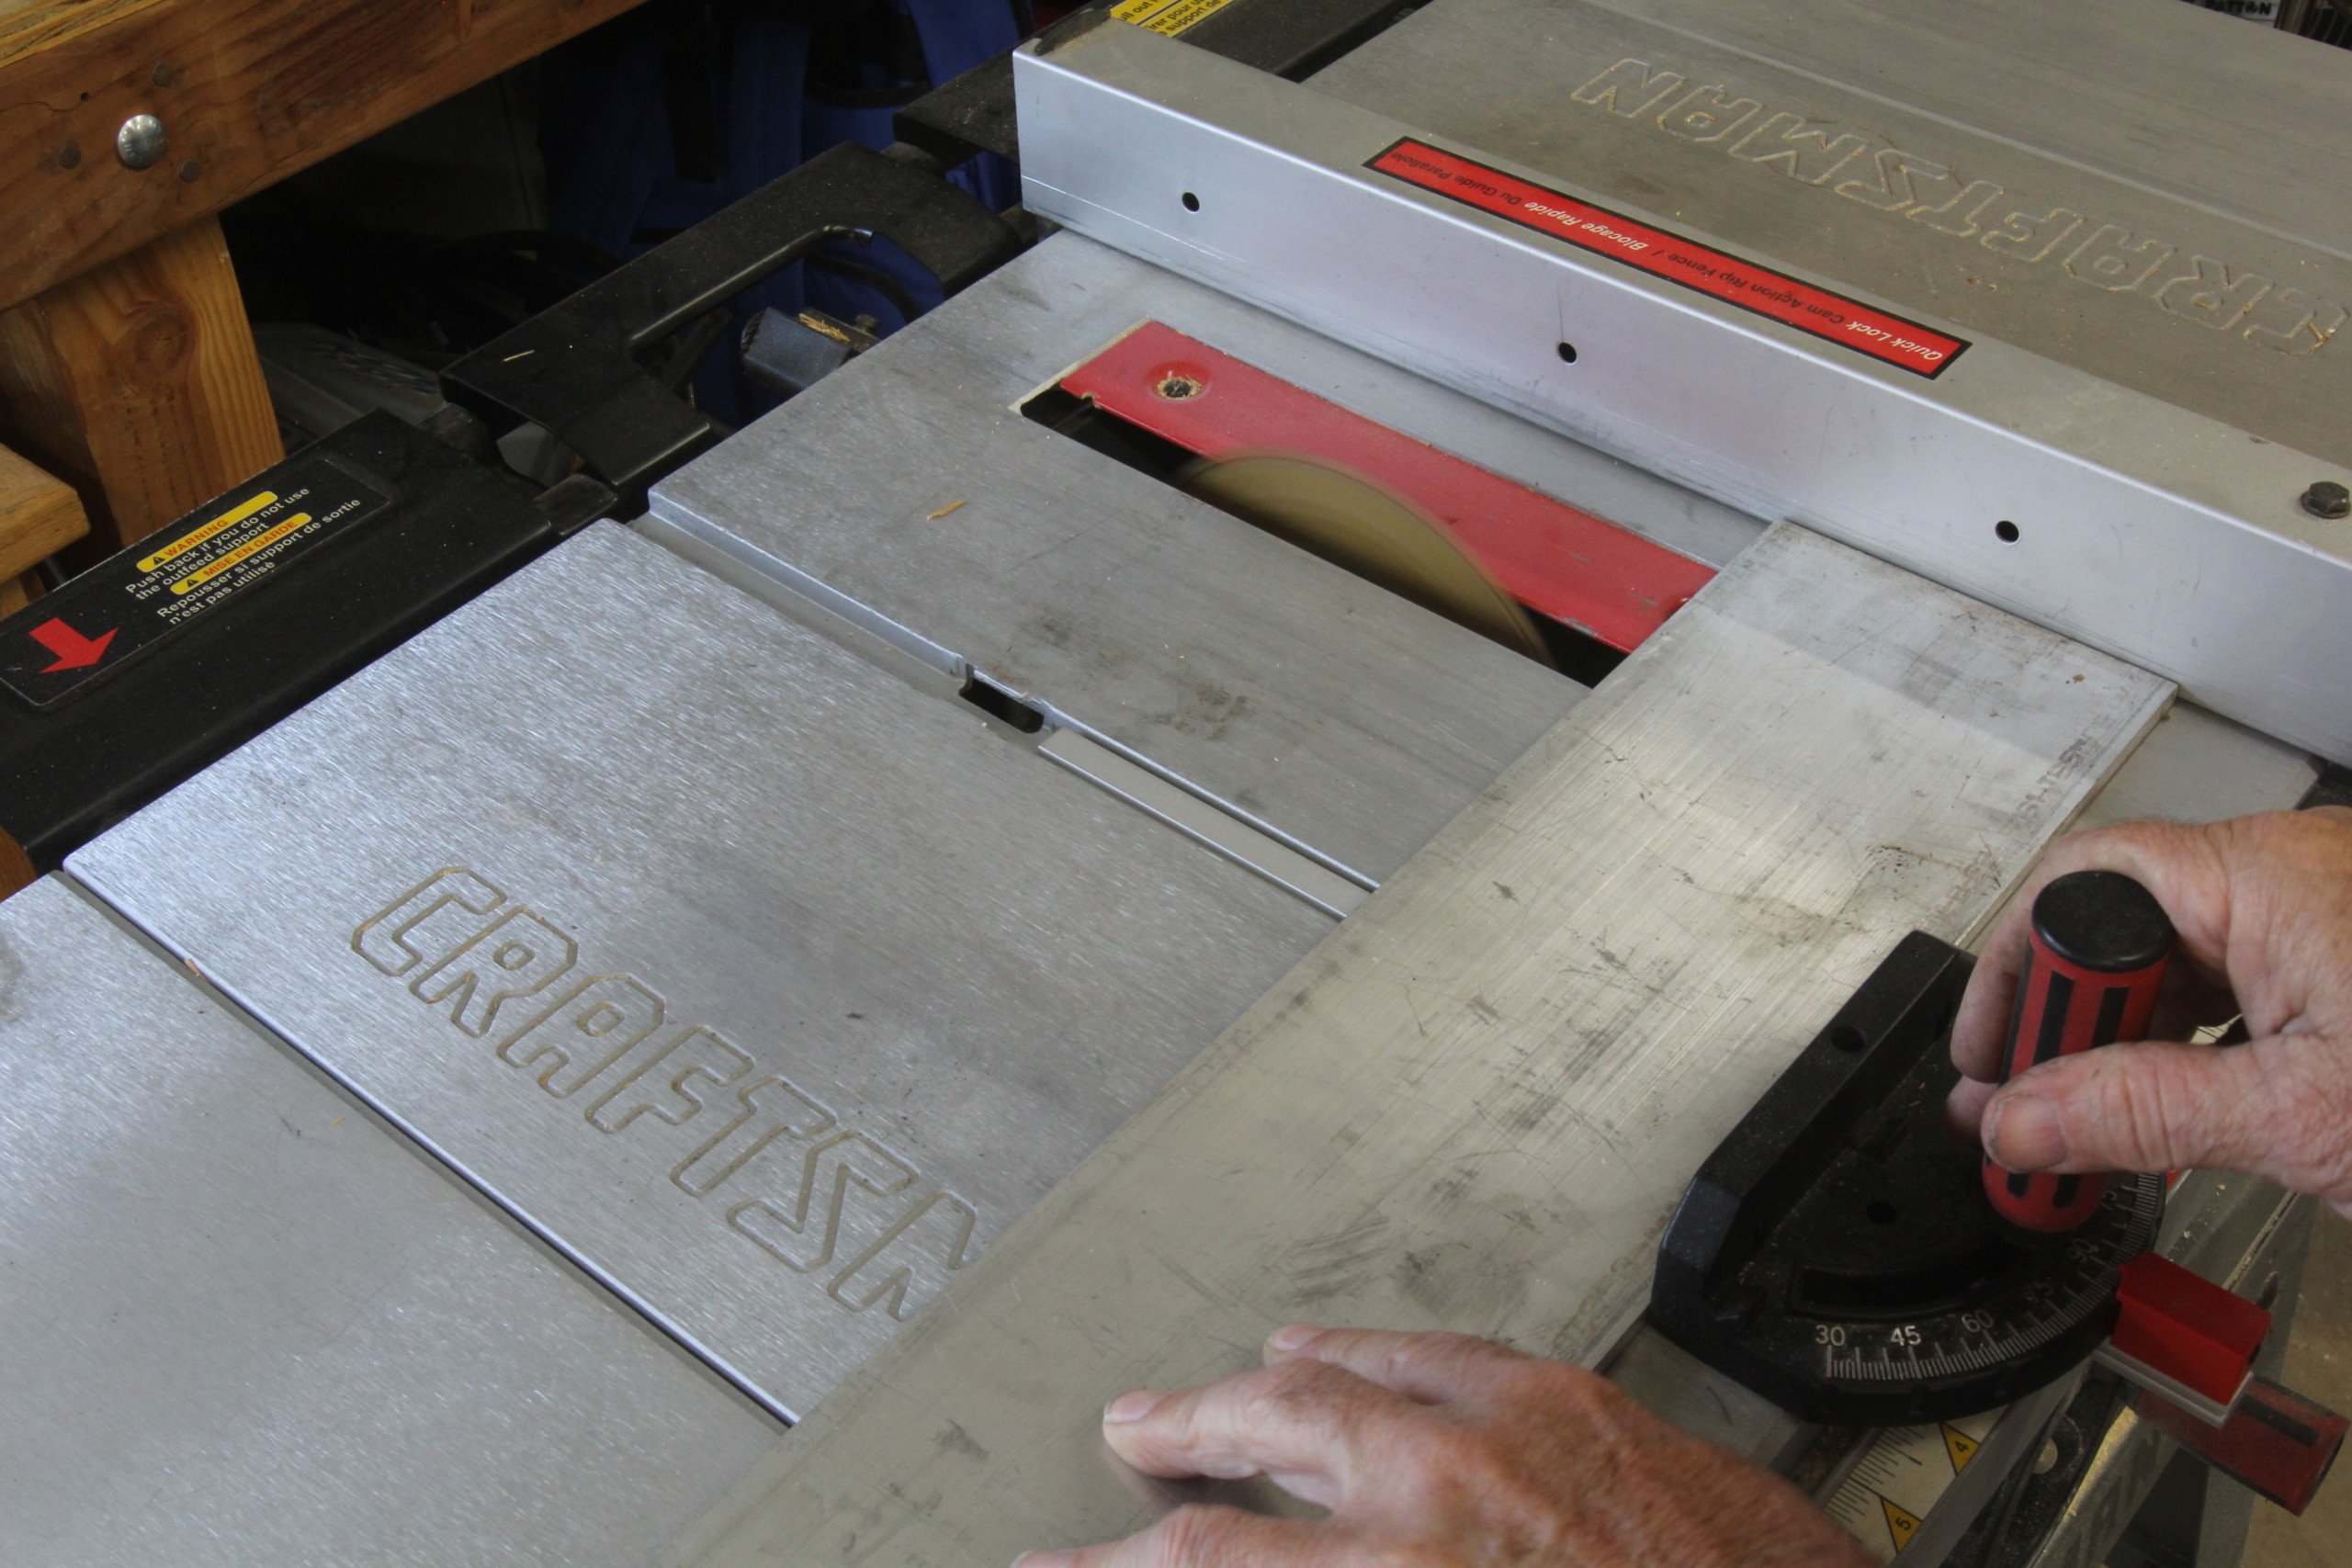 “What I Learned Today,” With Jeff Smith: Simple Sheet Metal Cutting